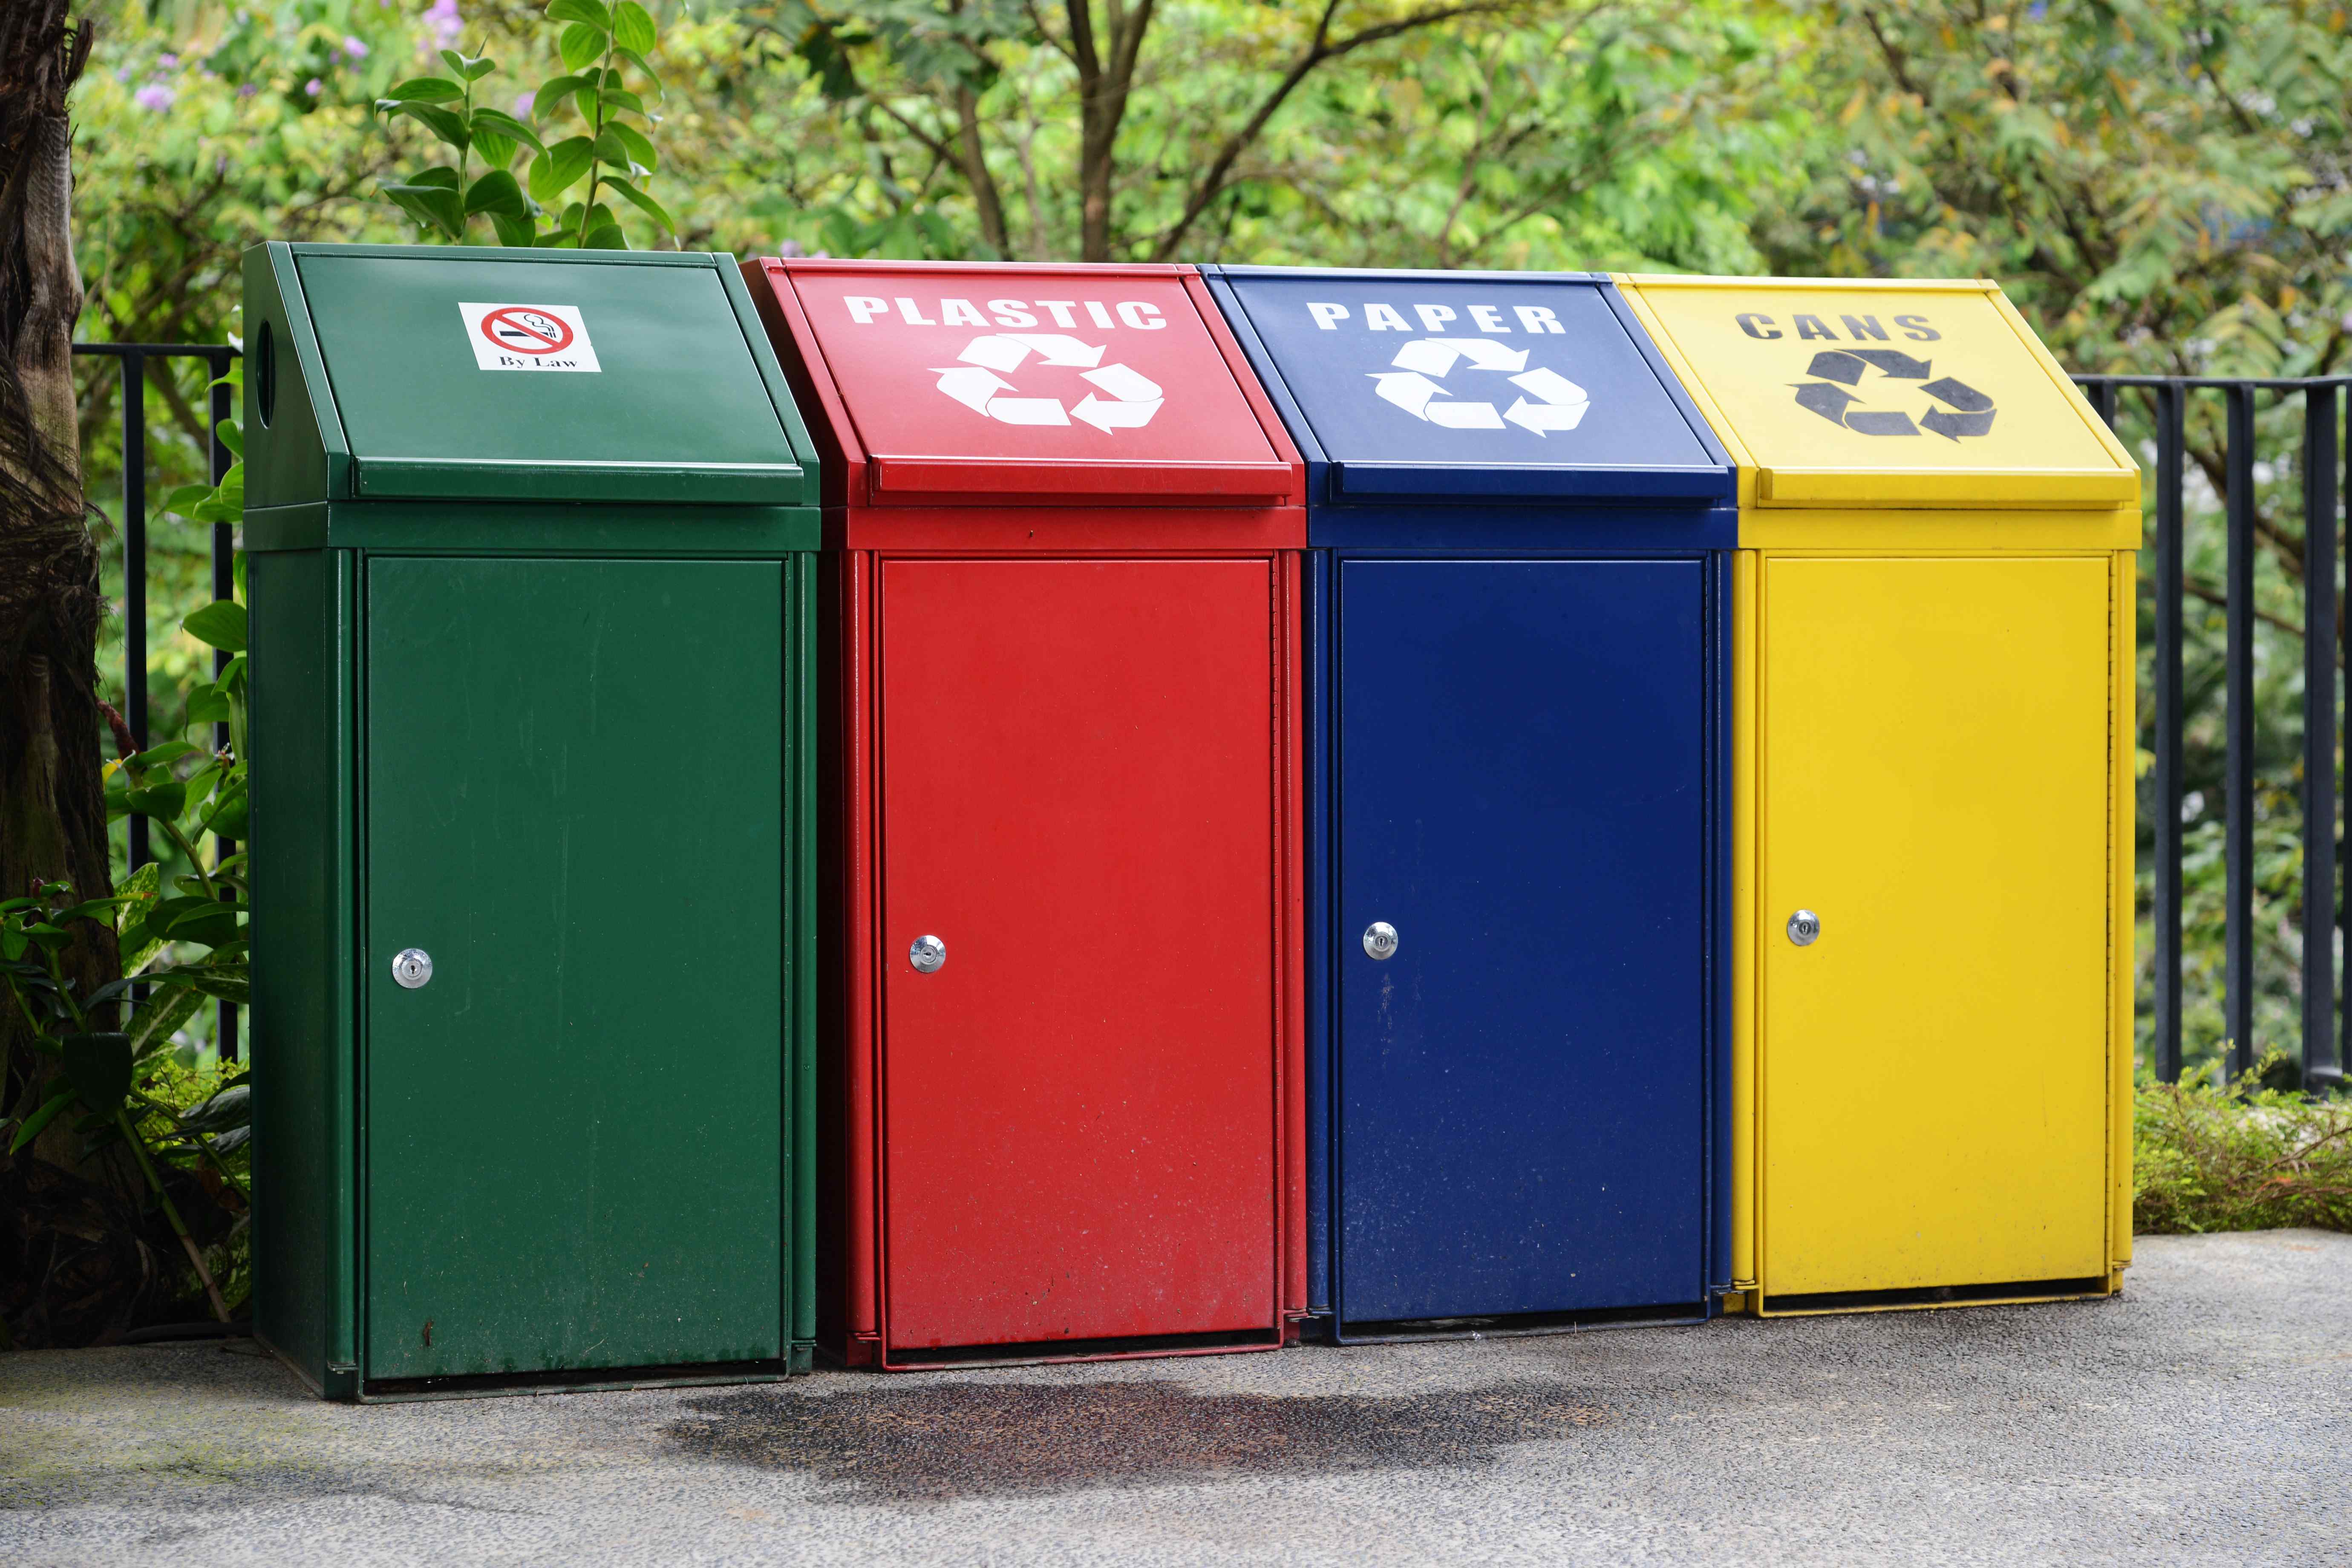 Multicolored trash and recycling bins